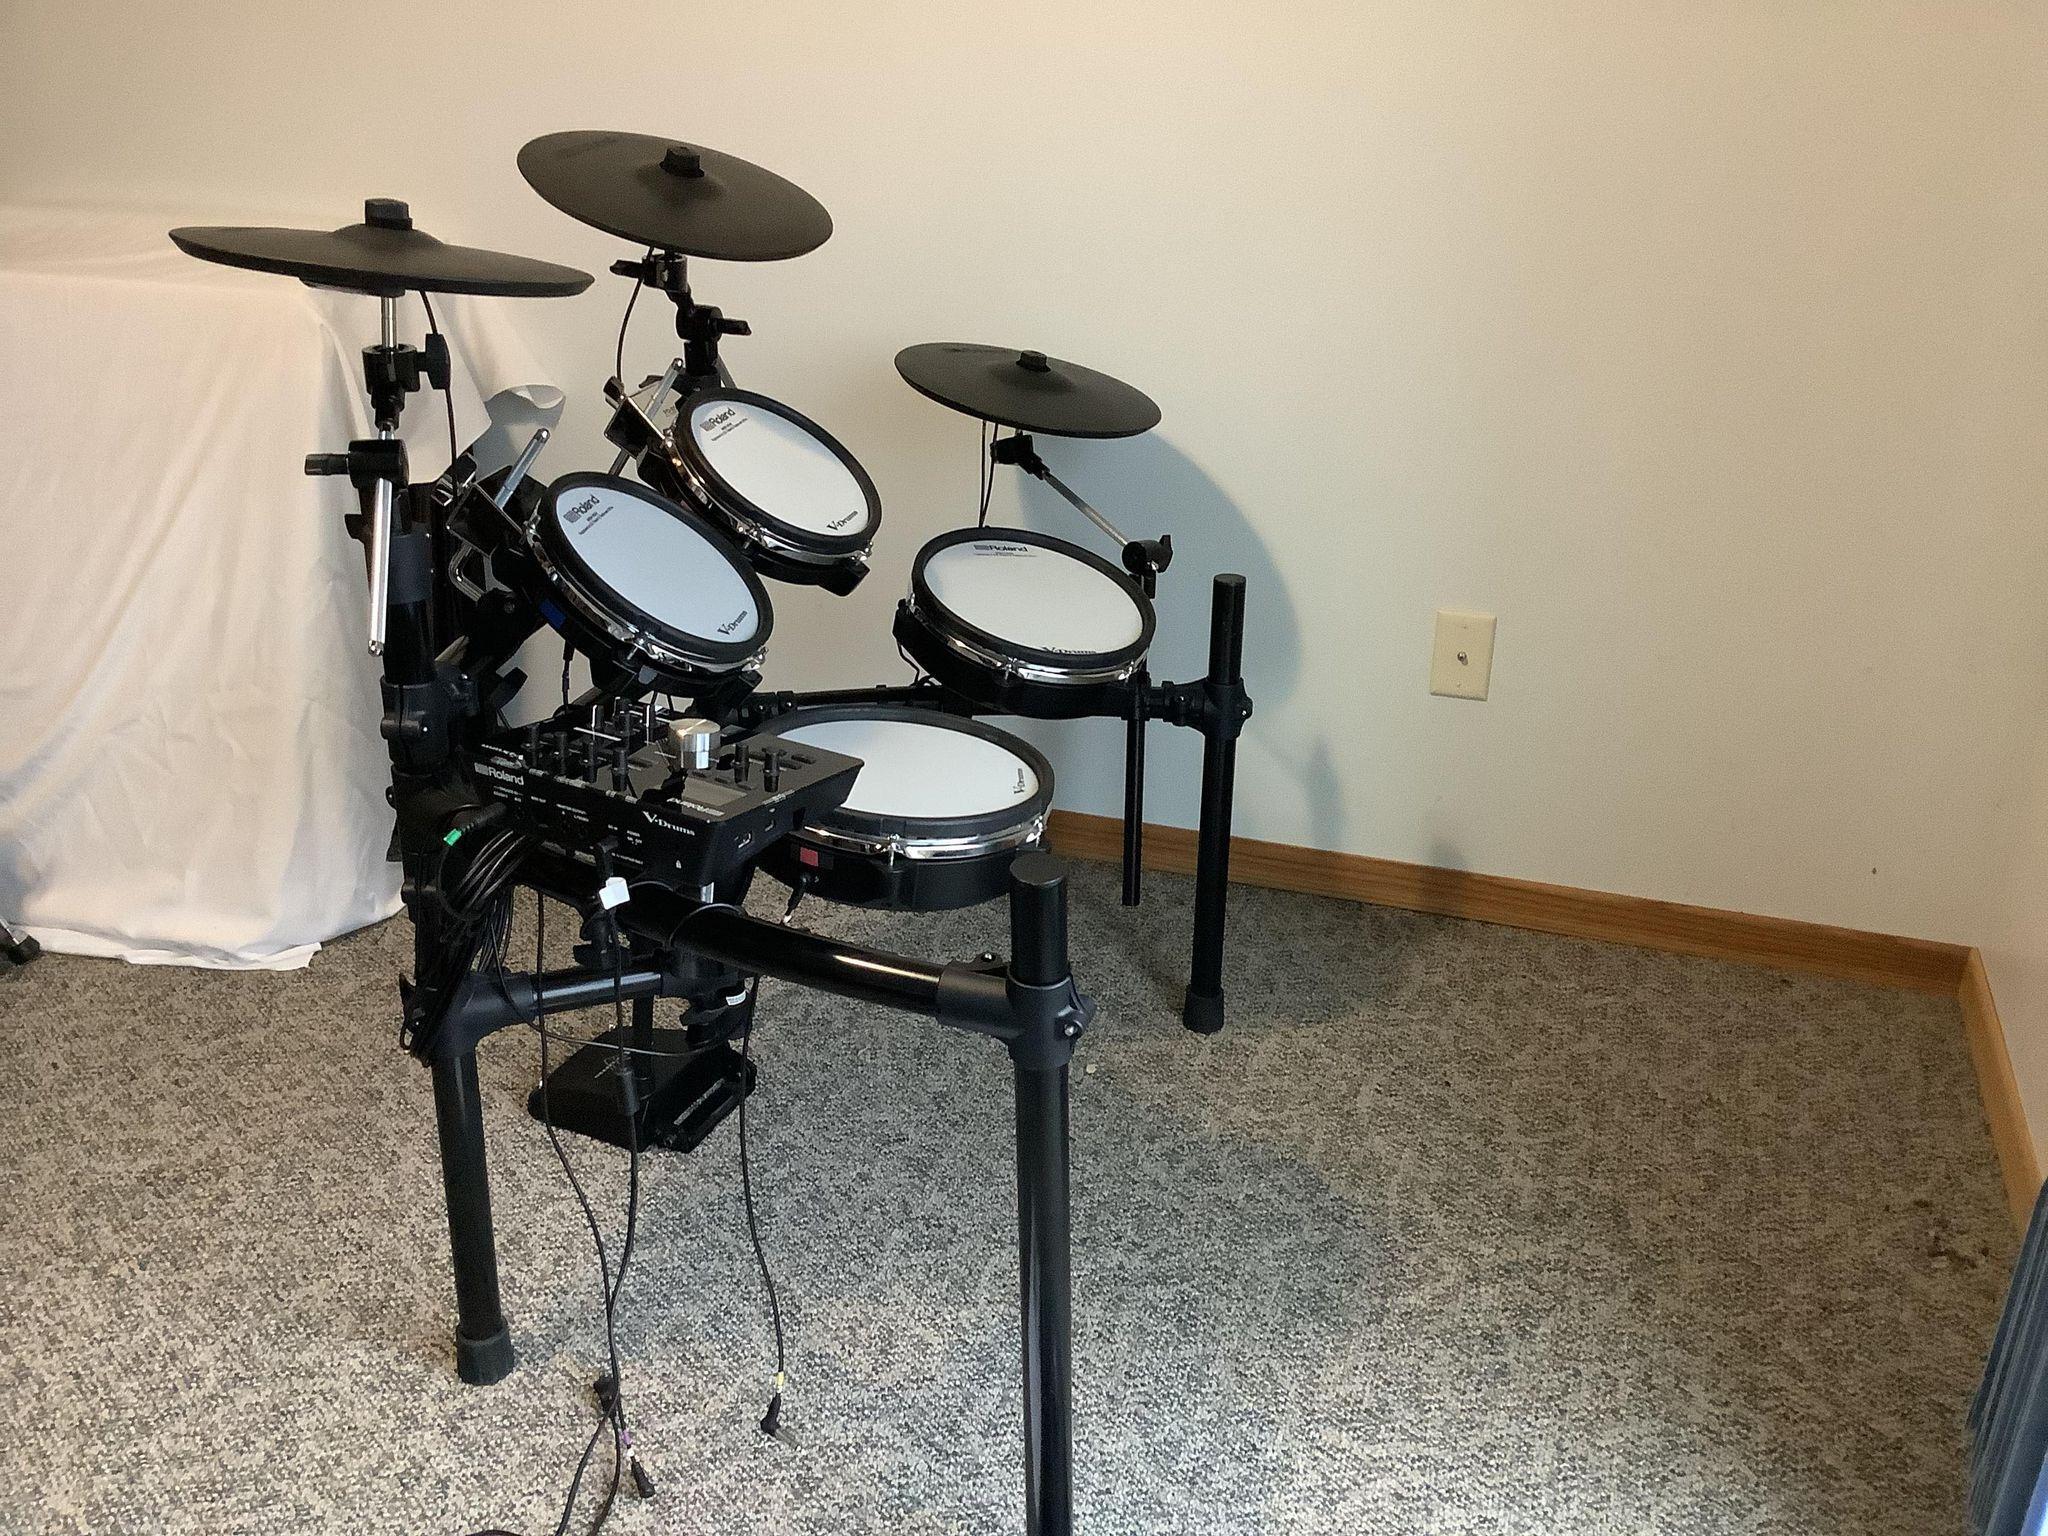 Used Roland TD-25KV-S Drums in excellent condition